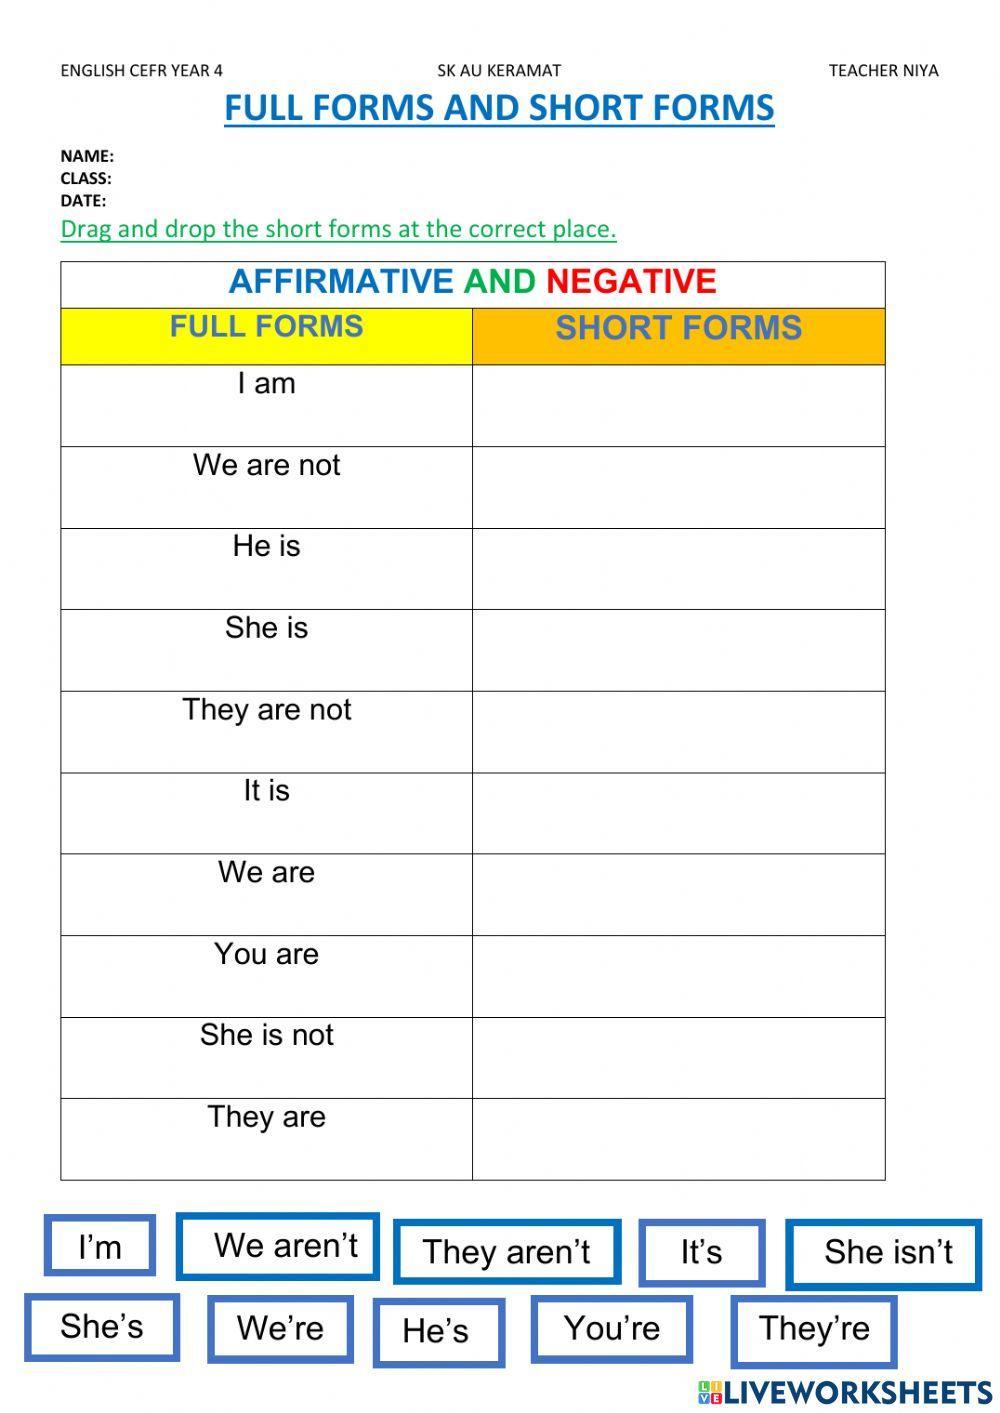 Full forms and short forms interactive worksheet